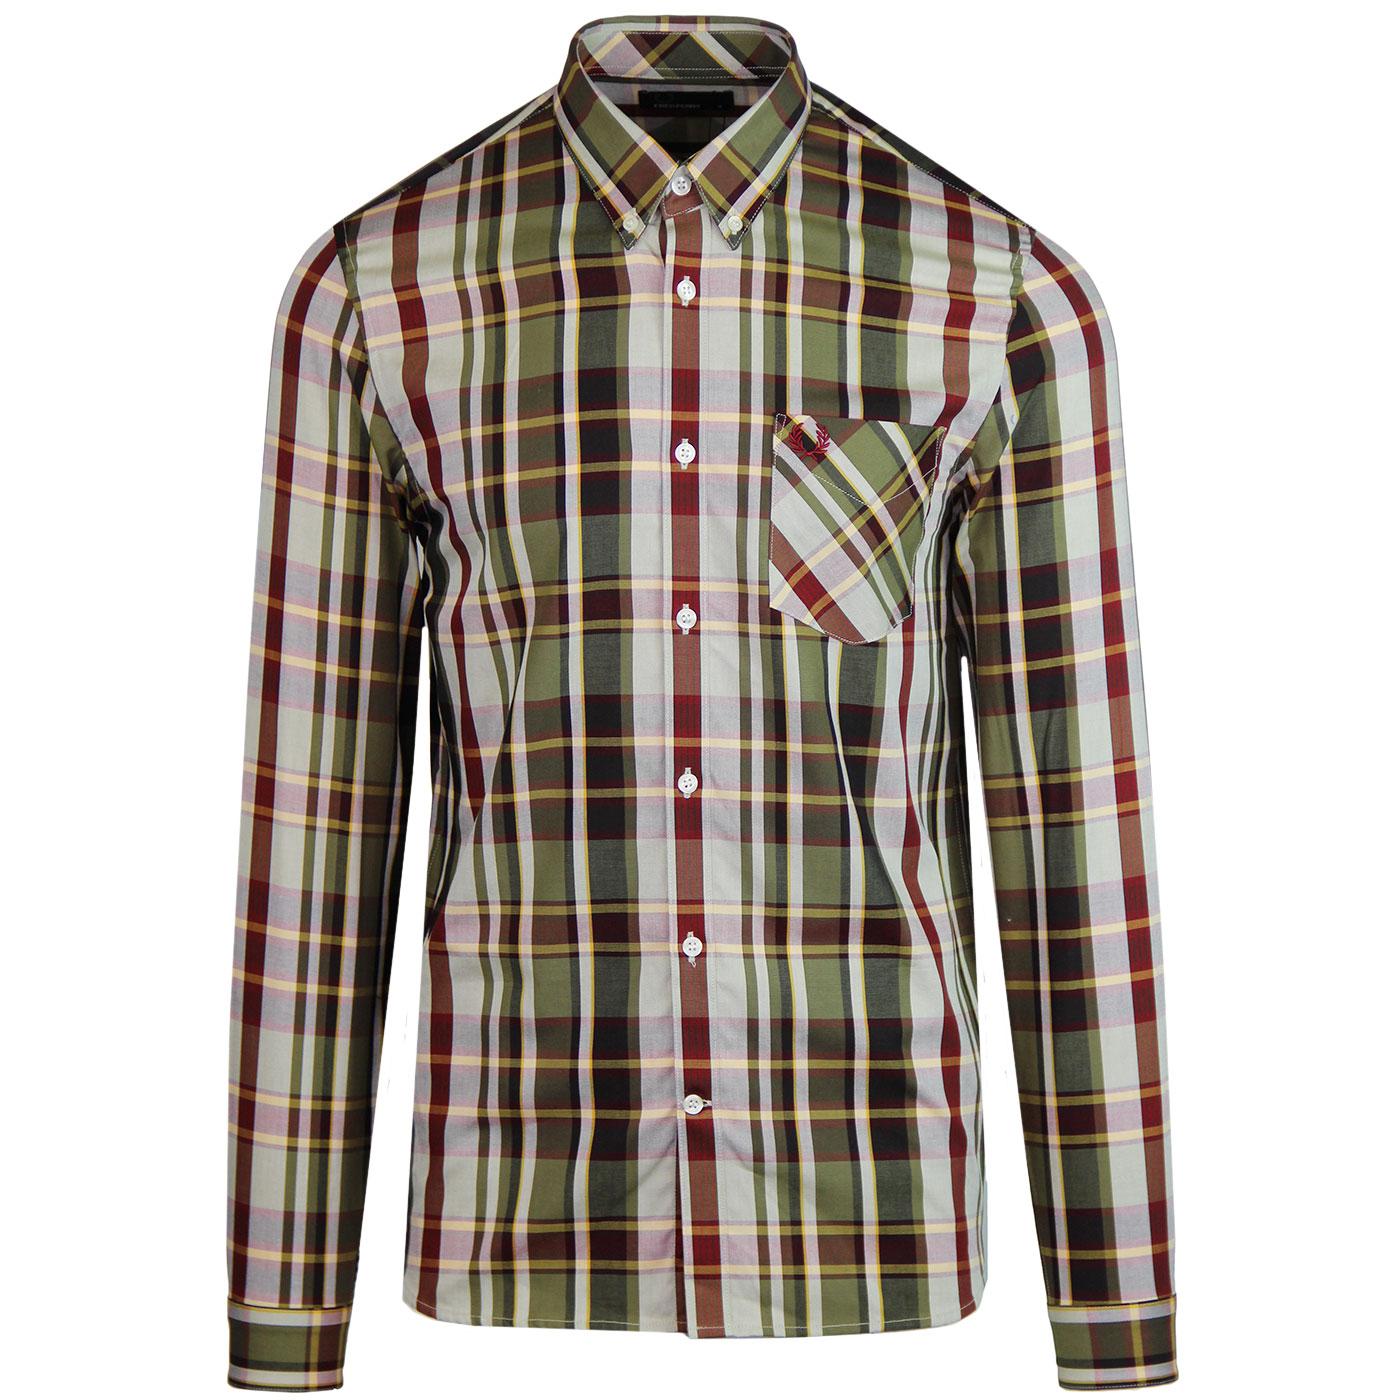 FRED PERRY Mod Bold Check Button Down Shirt (Port)